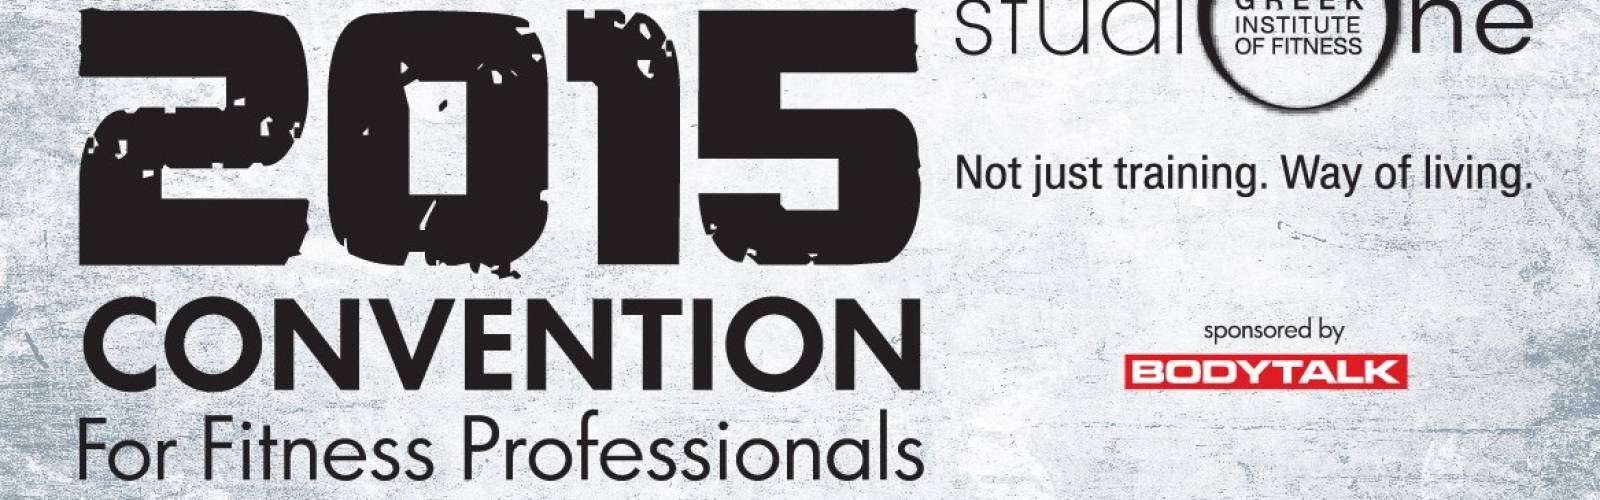 2015 Convention for Fitness Professionals